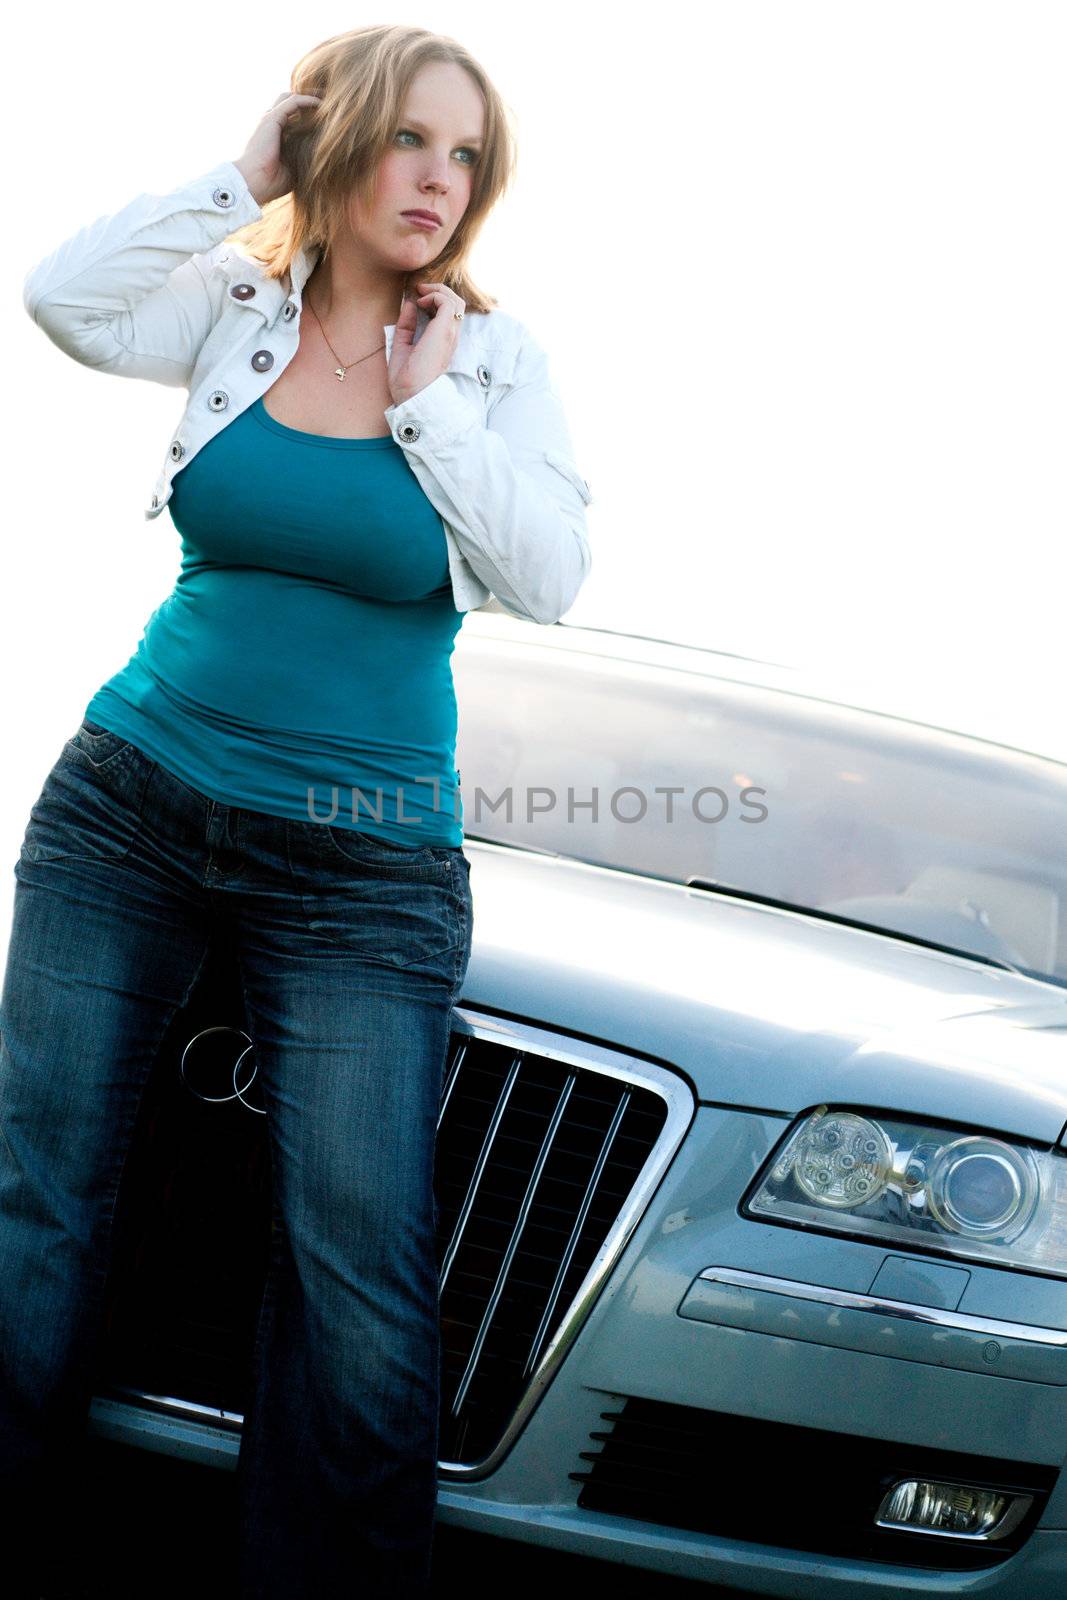 Being the model in front of a car